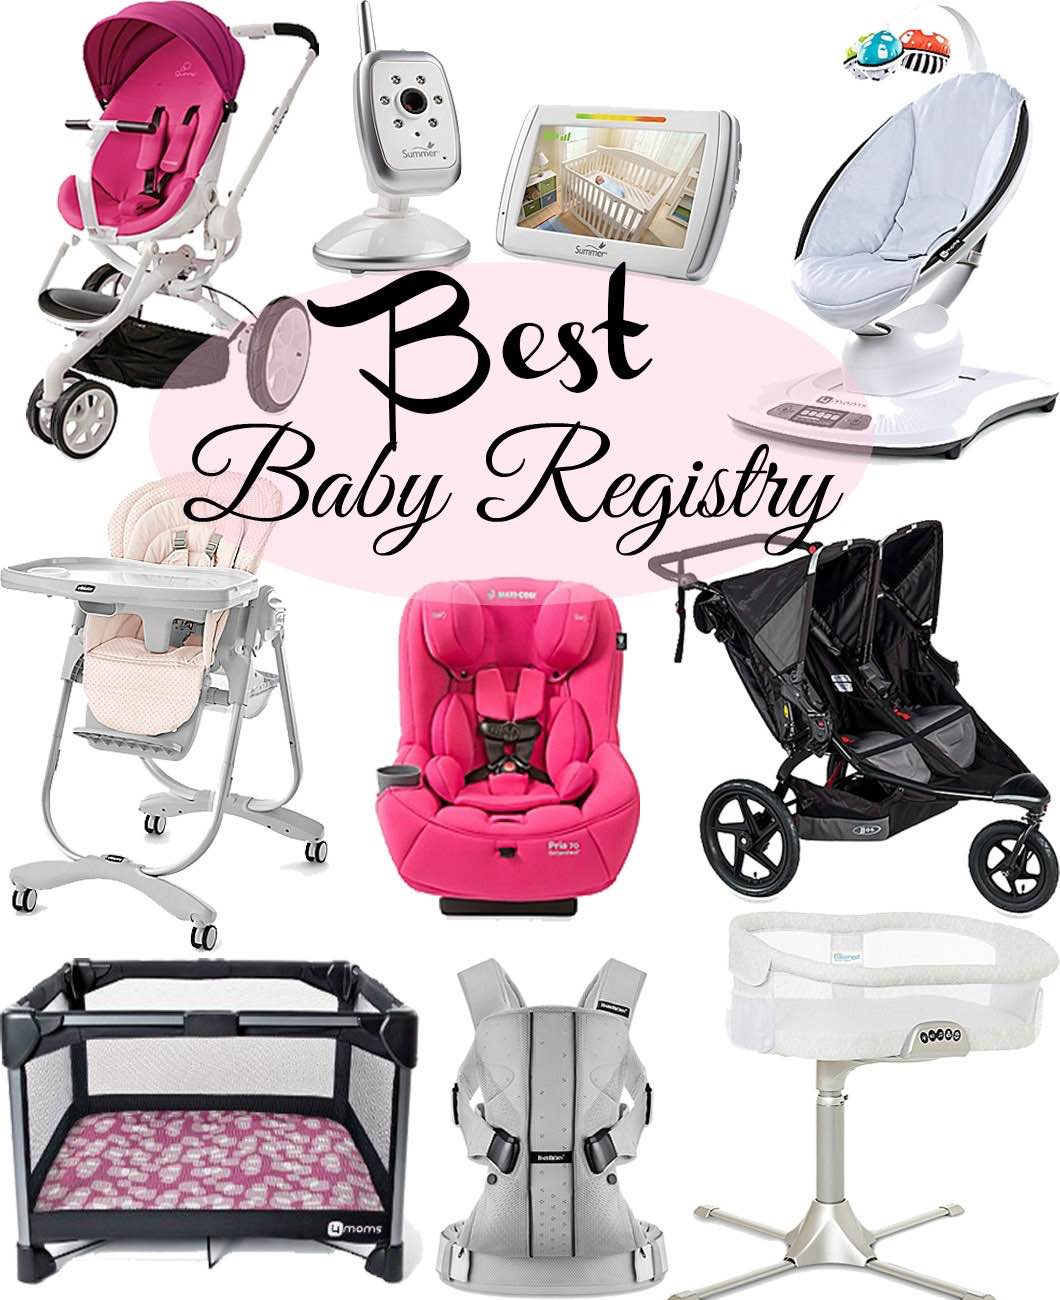 Best Baby Registry with Buy Buy Baby by Atlanta blogger Jessica of Happily Hughes